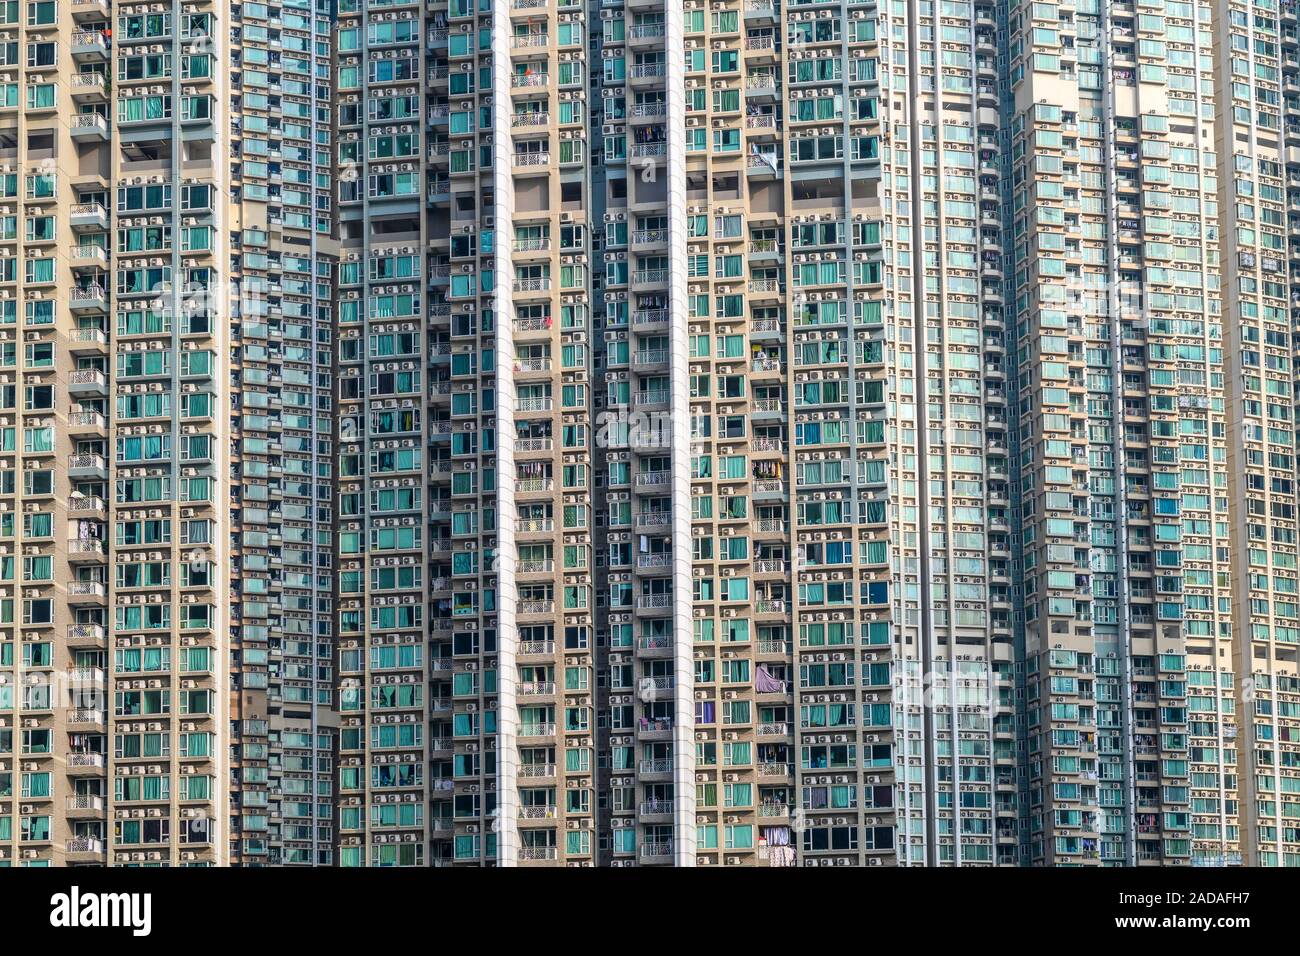 LOHAS Park is a Hong Kong seaside high rise and high density residential development situated in Tseung Kwan O. Stock Photo